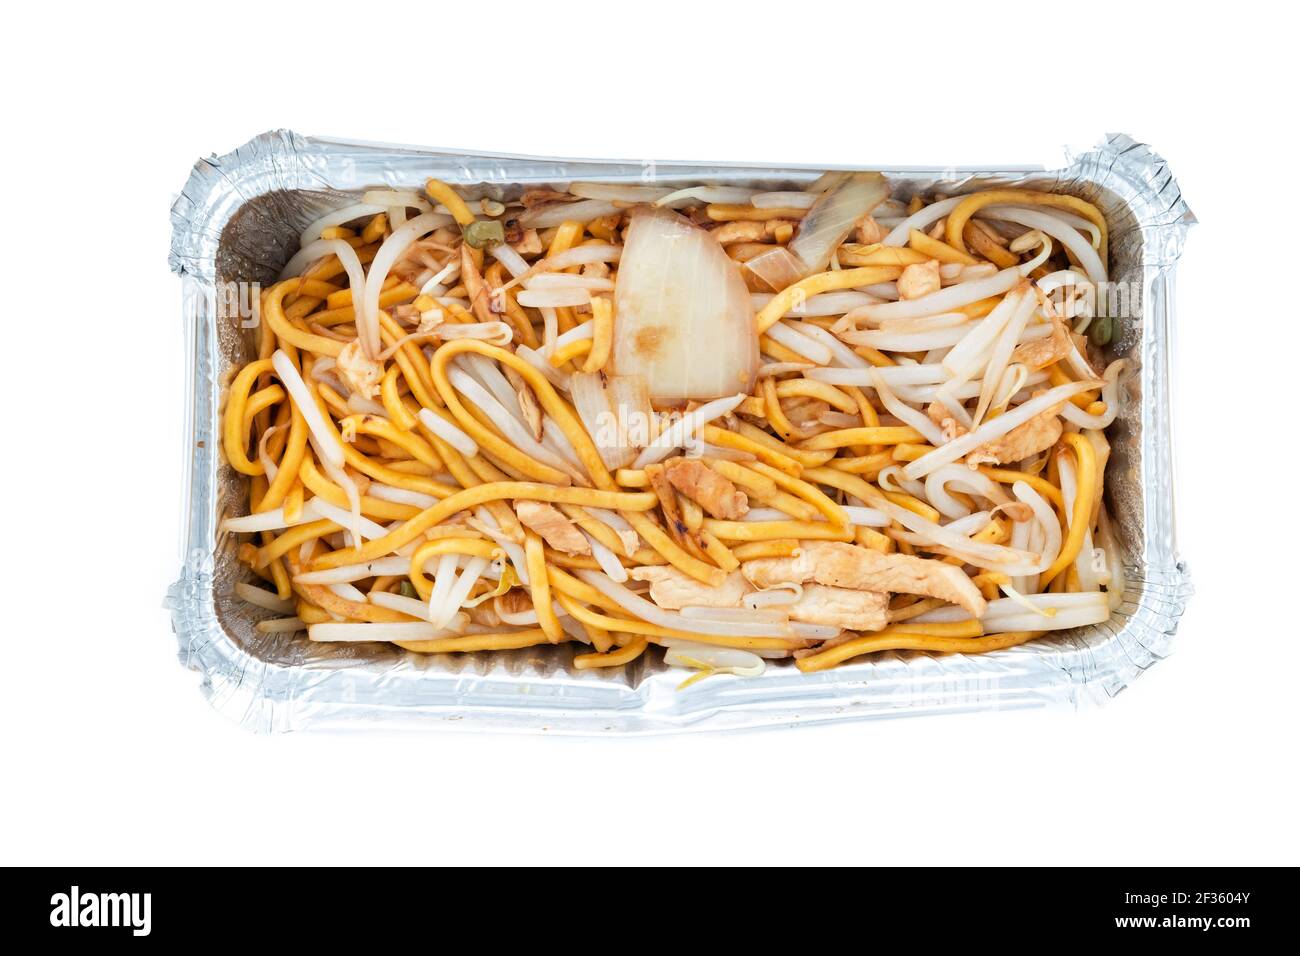 A portion of chicken chow mien, in a silver foil container. The food has just been purchased from a Chinese take away shop in the UK. A fast food meal Stock Photo